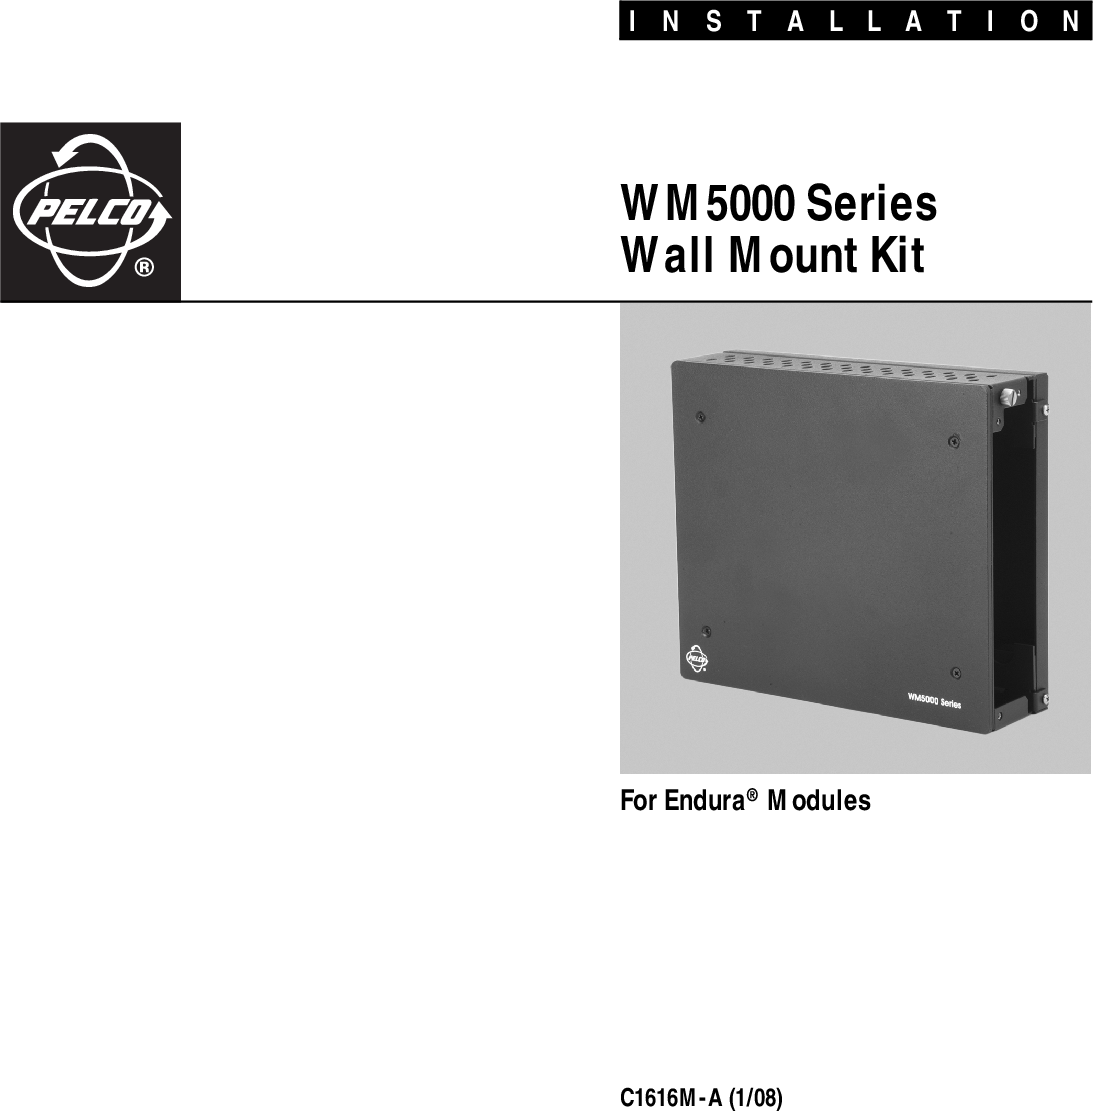 Page 2 of 8 - Pelco Pelco-W-M-5000-Series-Users-Manual- Pelco_WM5000_Series_Wall_Mount_Kit_manual  Pelco-w-m-5000-series-users-manual